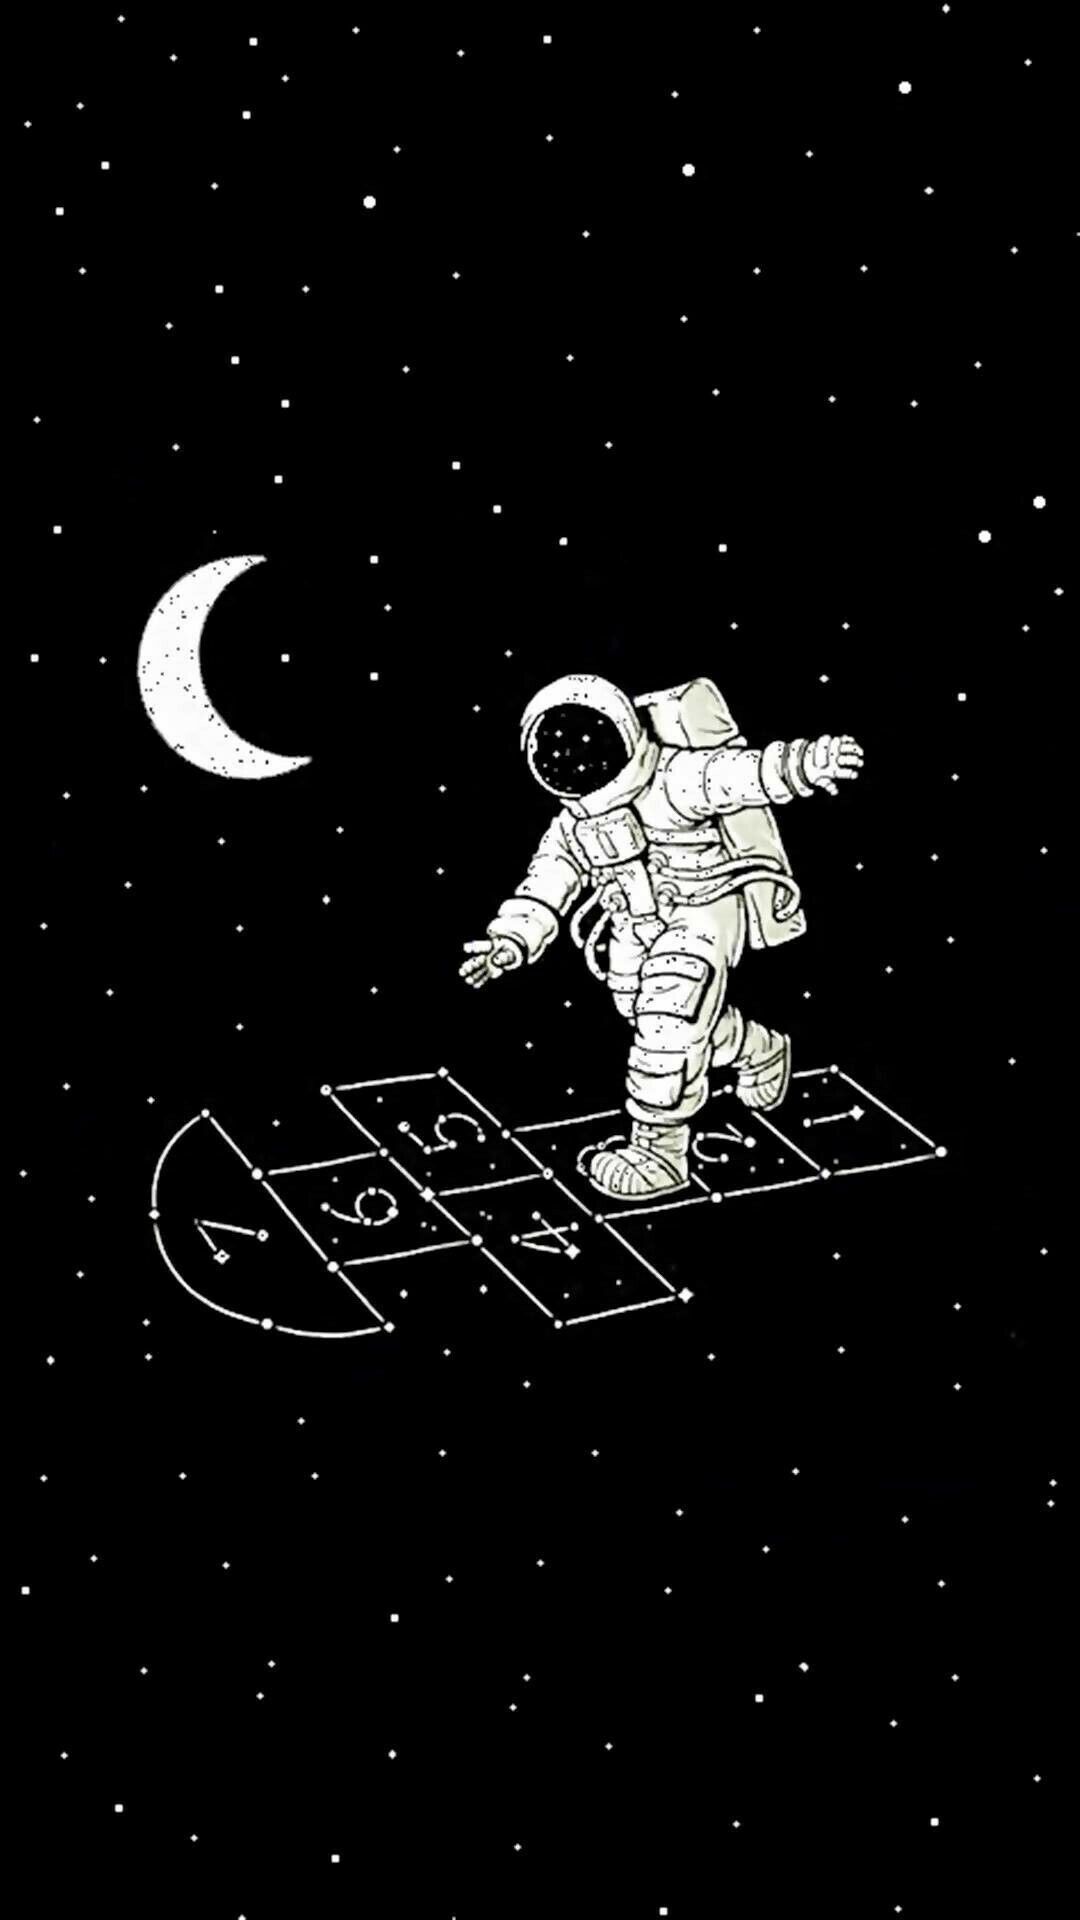 Astronaut playing hopscotch in space - Space, astronaut, doodles, illustration